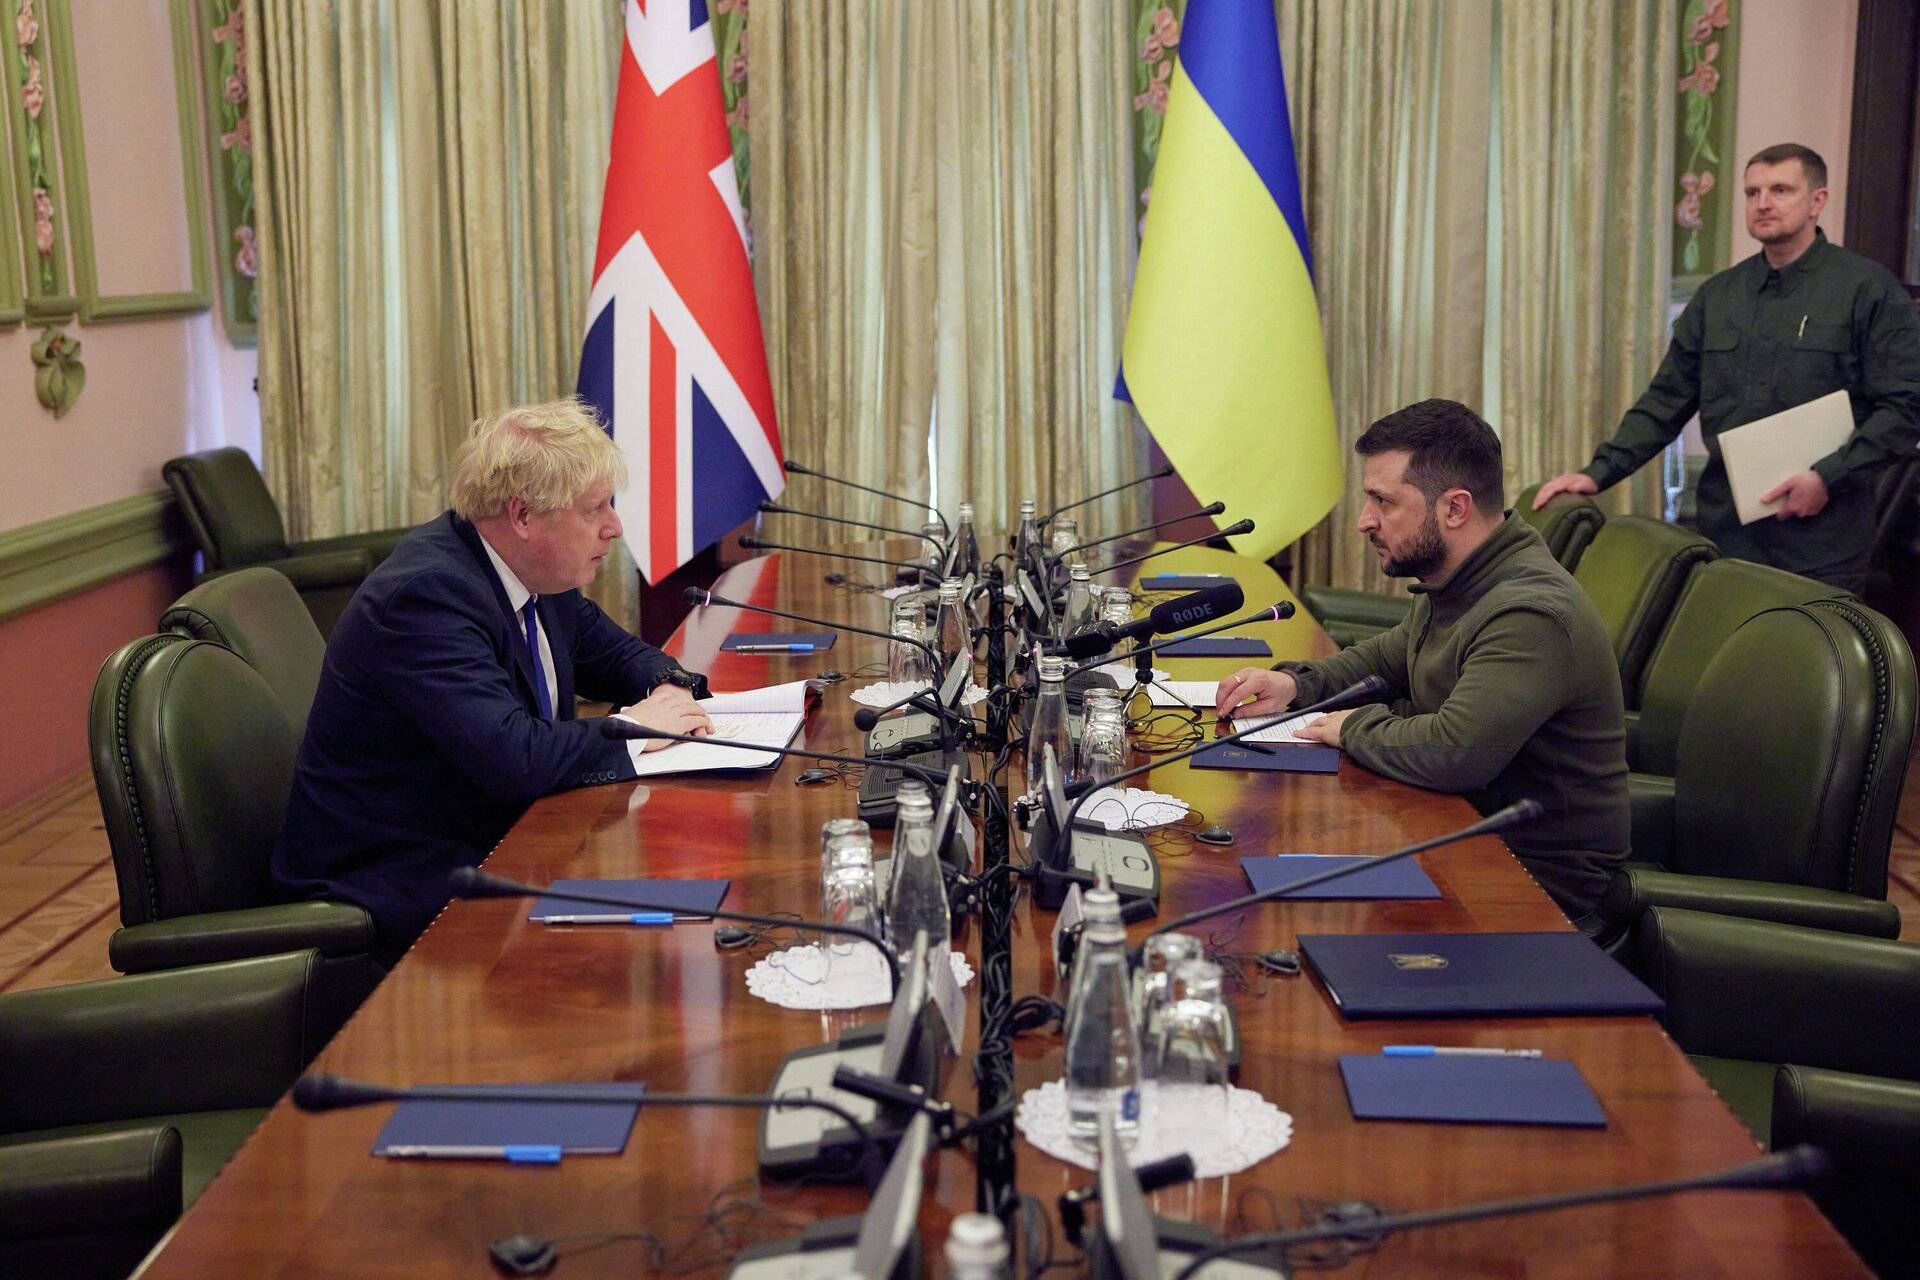 This handout picture taken and released on April 9, 2022 by Ukrainian Presidential Press Service shows Ukrainian President Volodymyr Zelensky (2R) speaking with British Prime Minister Boris Johnson (L) during their meeting in Kiev. - Sputnik International, 1920, 12.04.2022